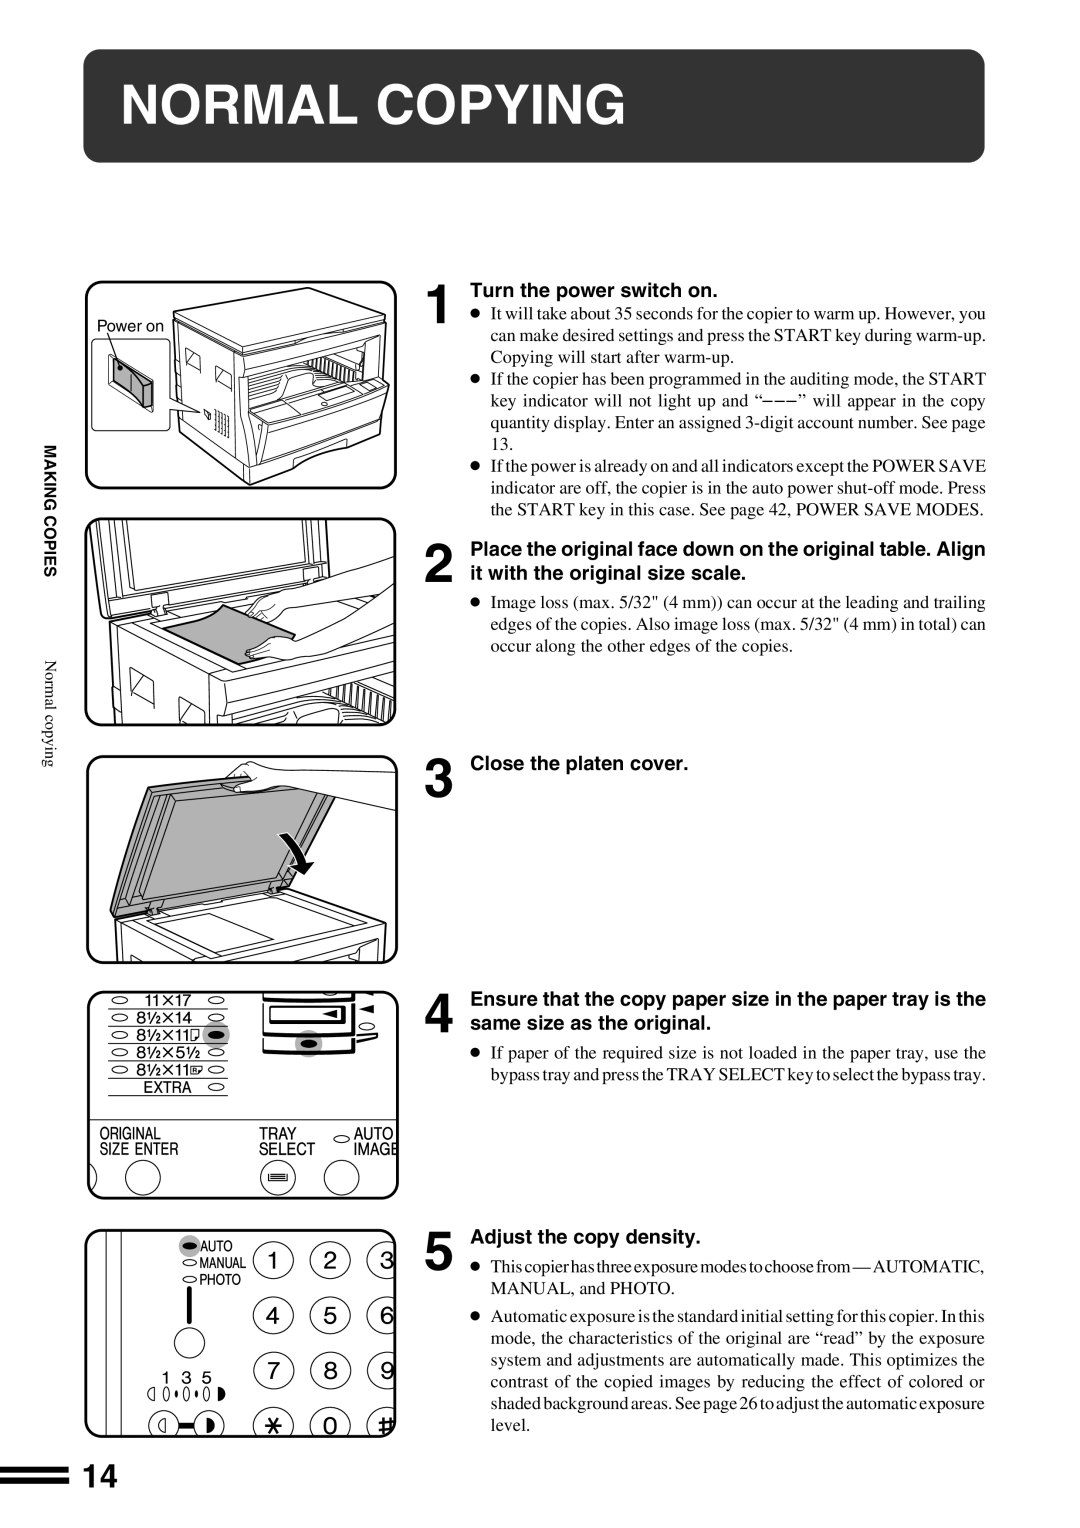 Sharp AR-162S operation manual Normal Copying, Turn the power switch on, Close the platen cover, Adjust the copy density 